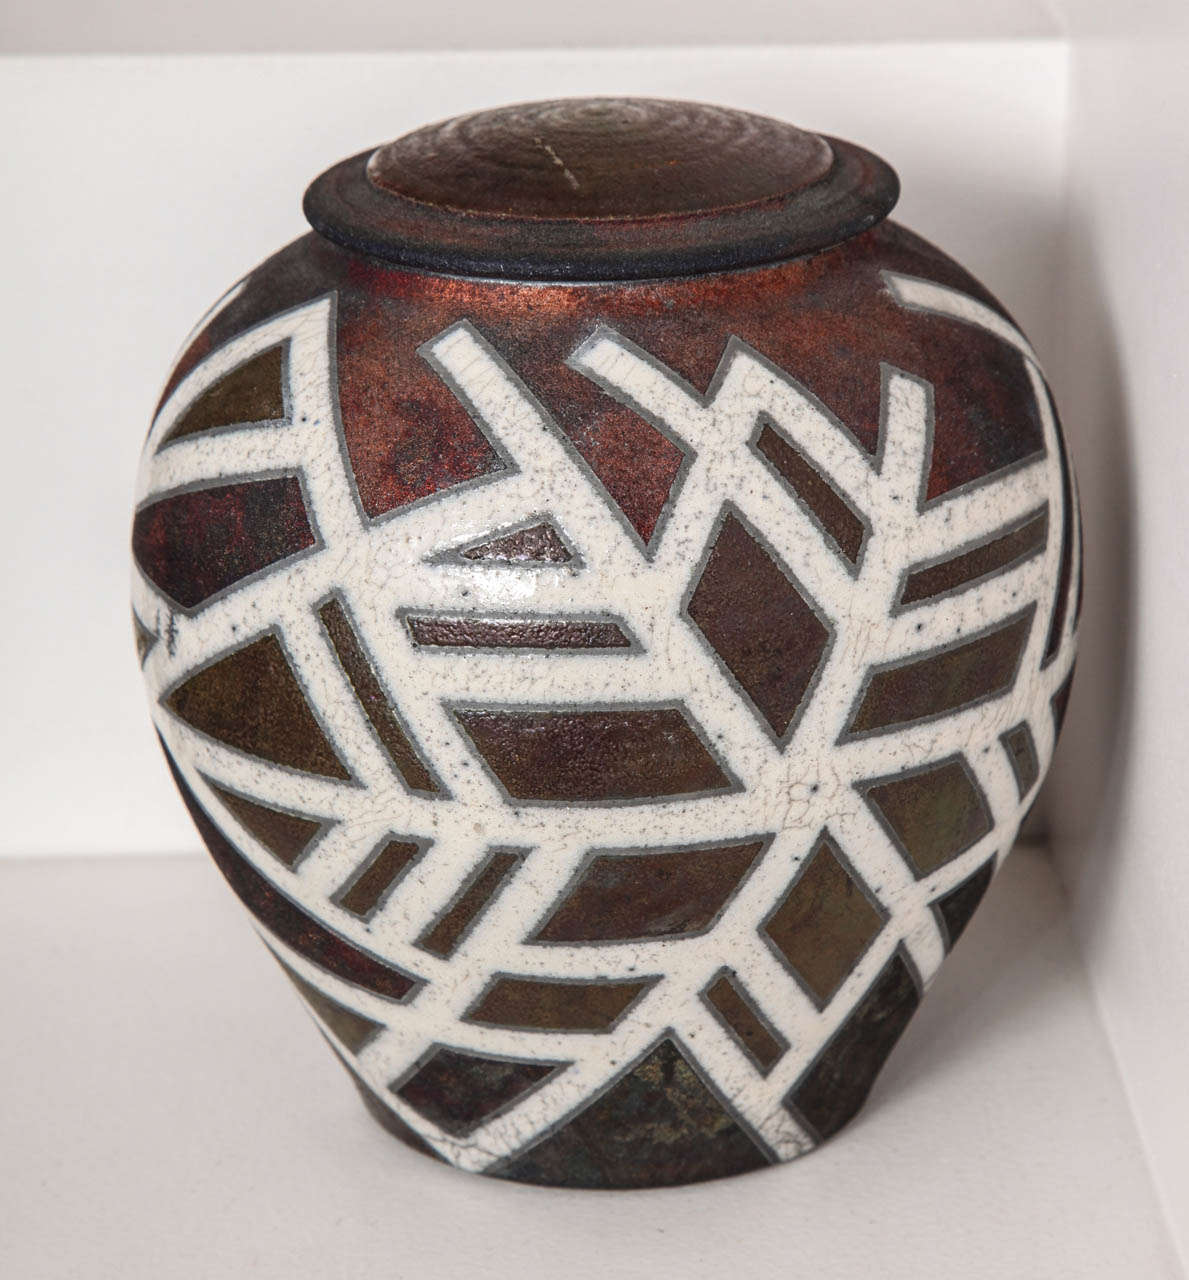 Deborah Slahta. 
“Cinnabar Snowflake” covered raku jar.
Signed and dated 2006. 
 
A Pennsylvania based potter, Deborah Slahta specializes in raku and stoneware pottery. Slahta uses the vessel form as a three-dimensional canvas, playing with